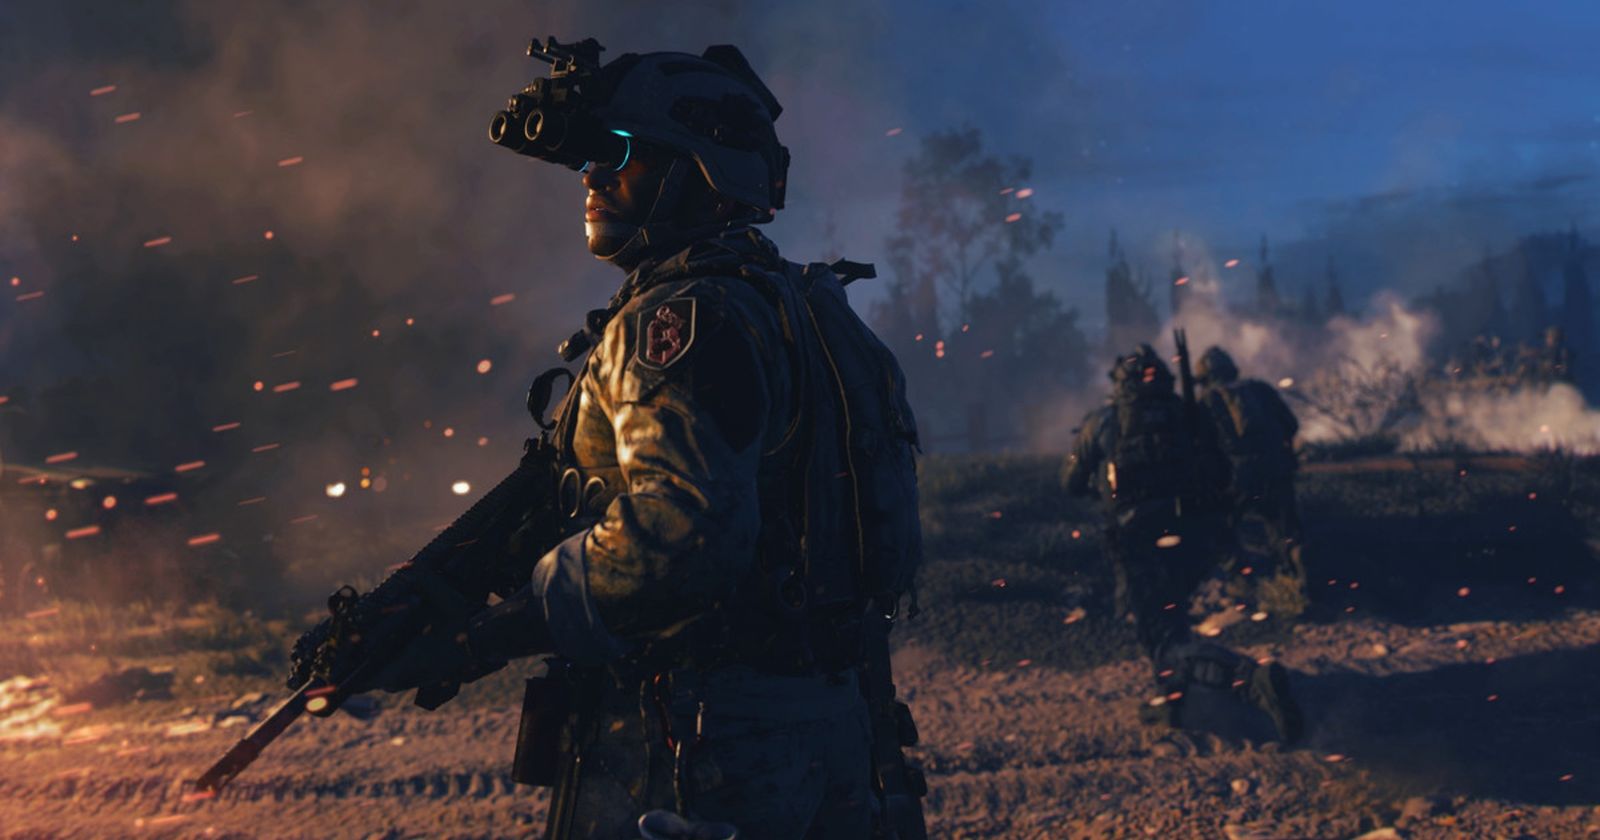 Call of Duty: Warzone 2.0: minimum and recommended specs to play on PC -  Meristation